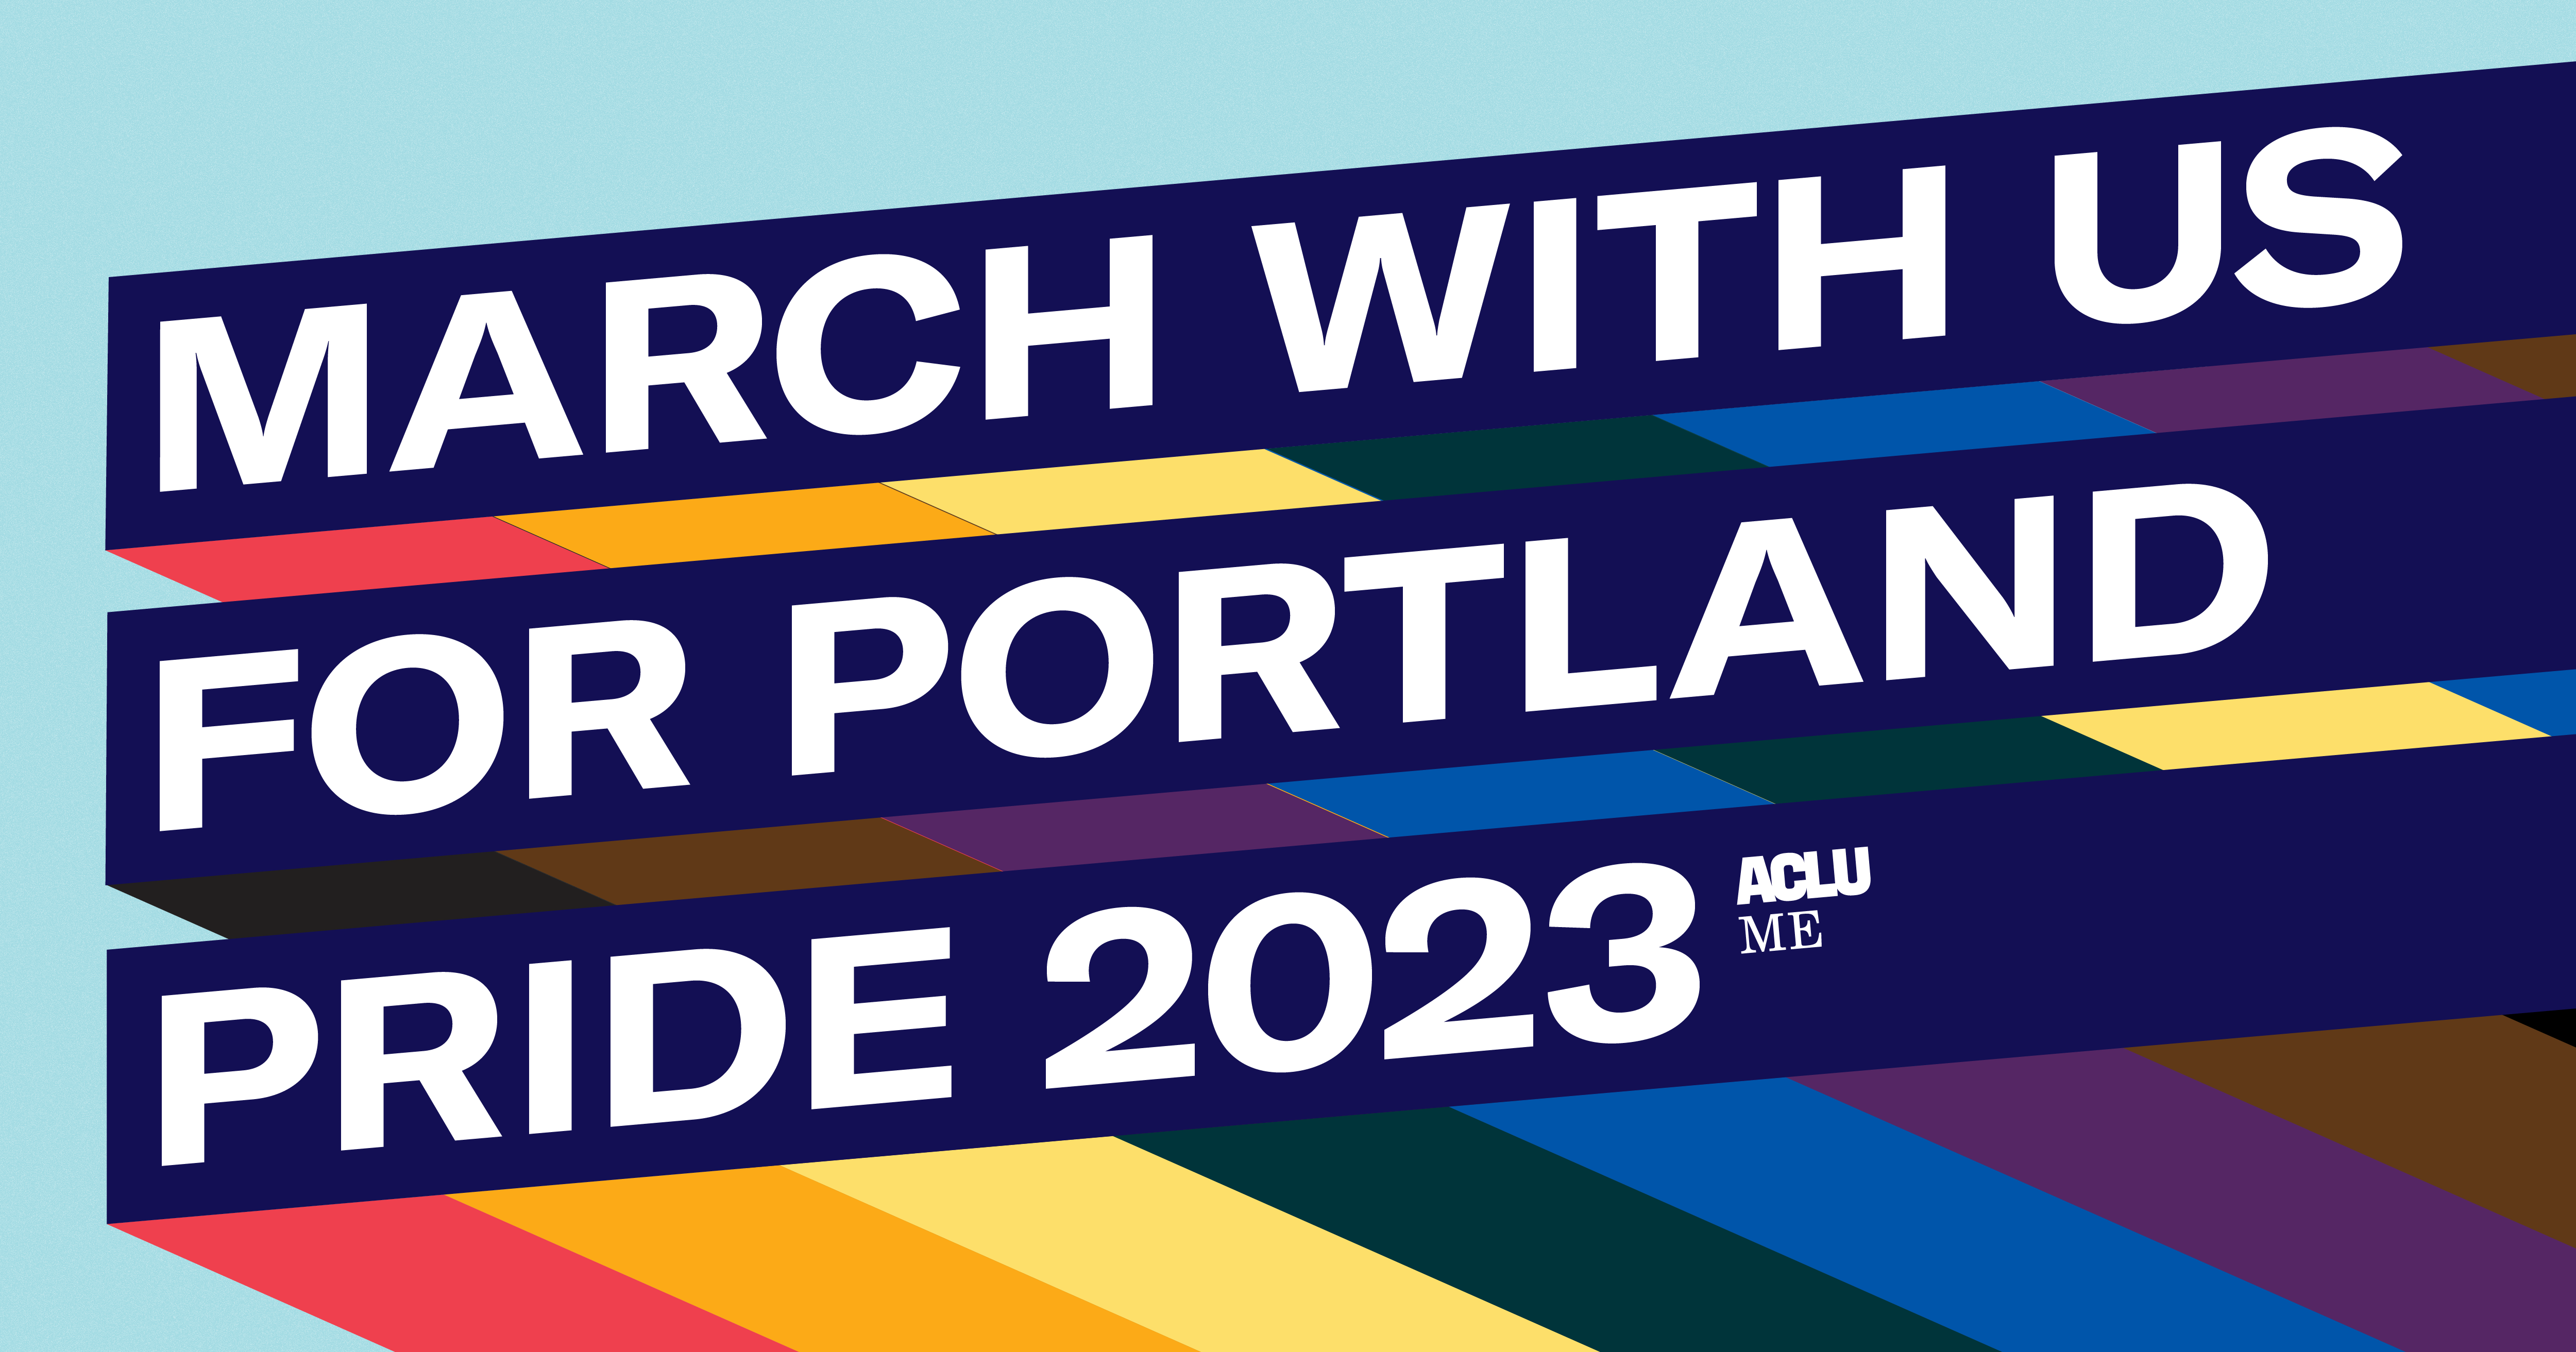 Rainbow stripe on light blue background with wording reading "March with us for Portland Pride 2023"